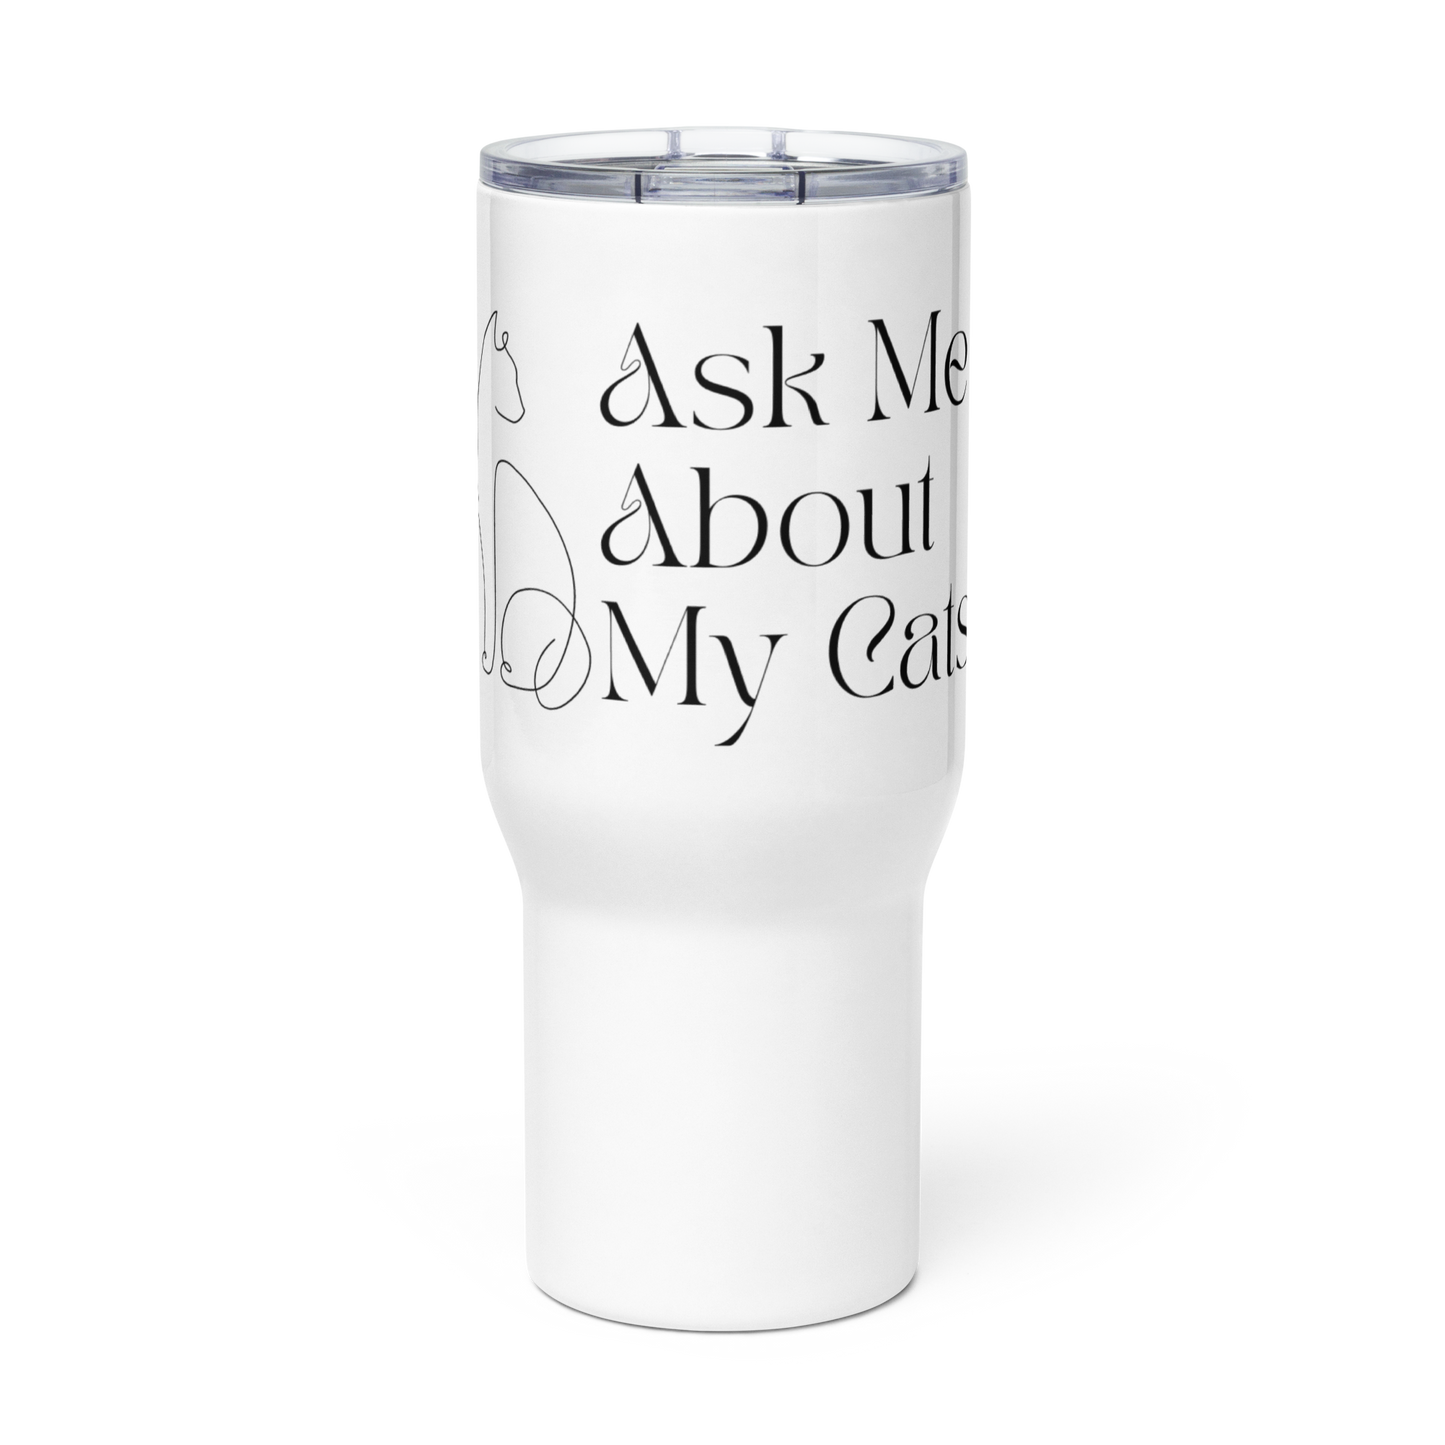 "Ask Me About My Cats" - Travel mug with a handle